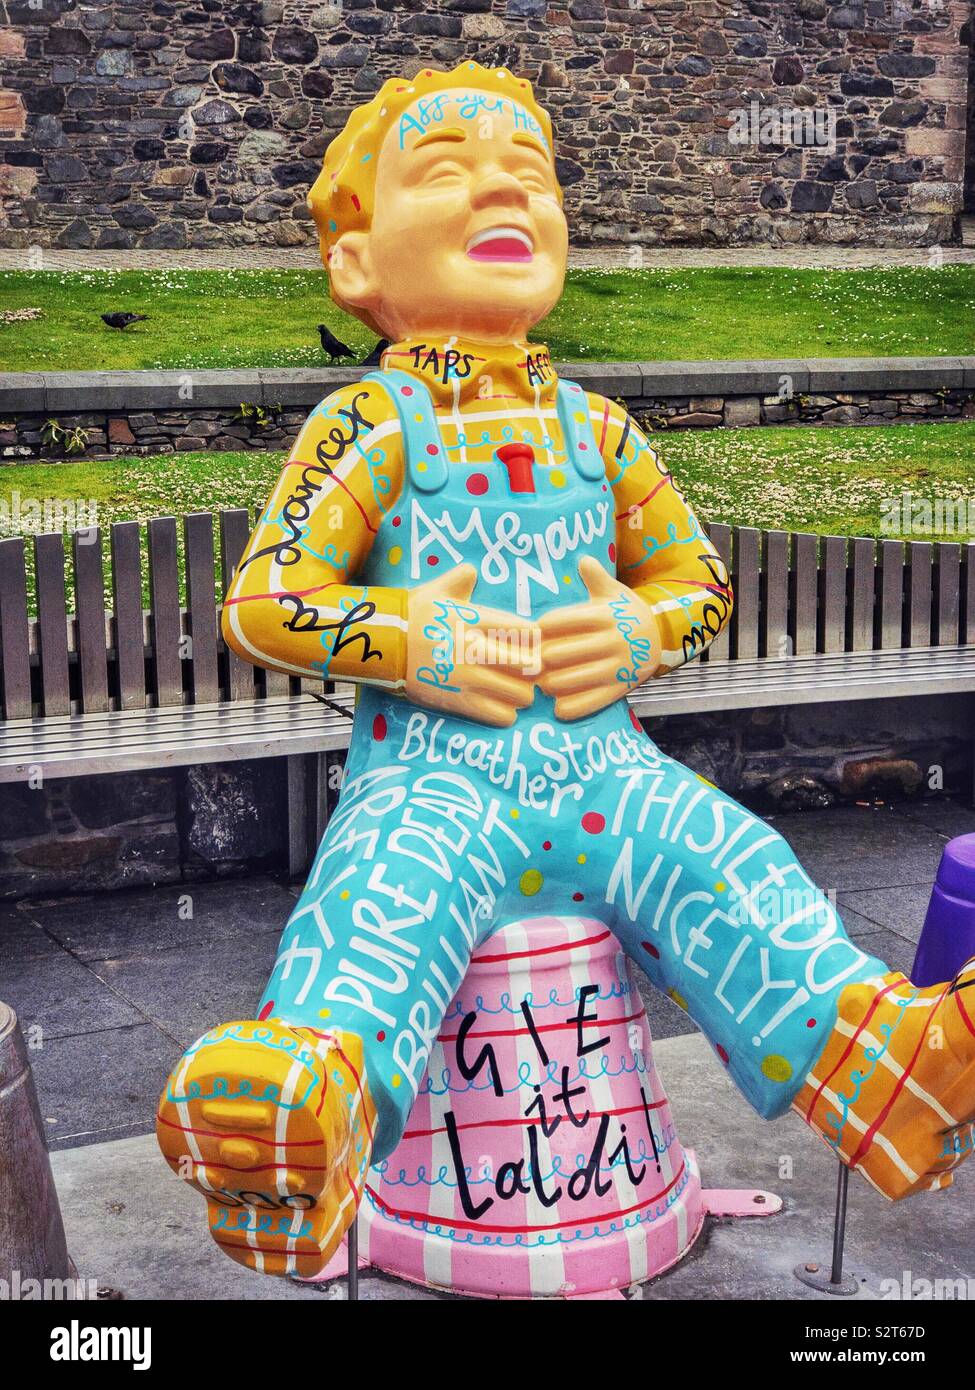 Sculpture of Oor Wullie, a famous Scottish comic book character, in Stranraer, Scotland. Part of the Big Bucket Trail 2019. This one is called Oor Patter and features famous Scottish words and sayings Stock Photo